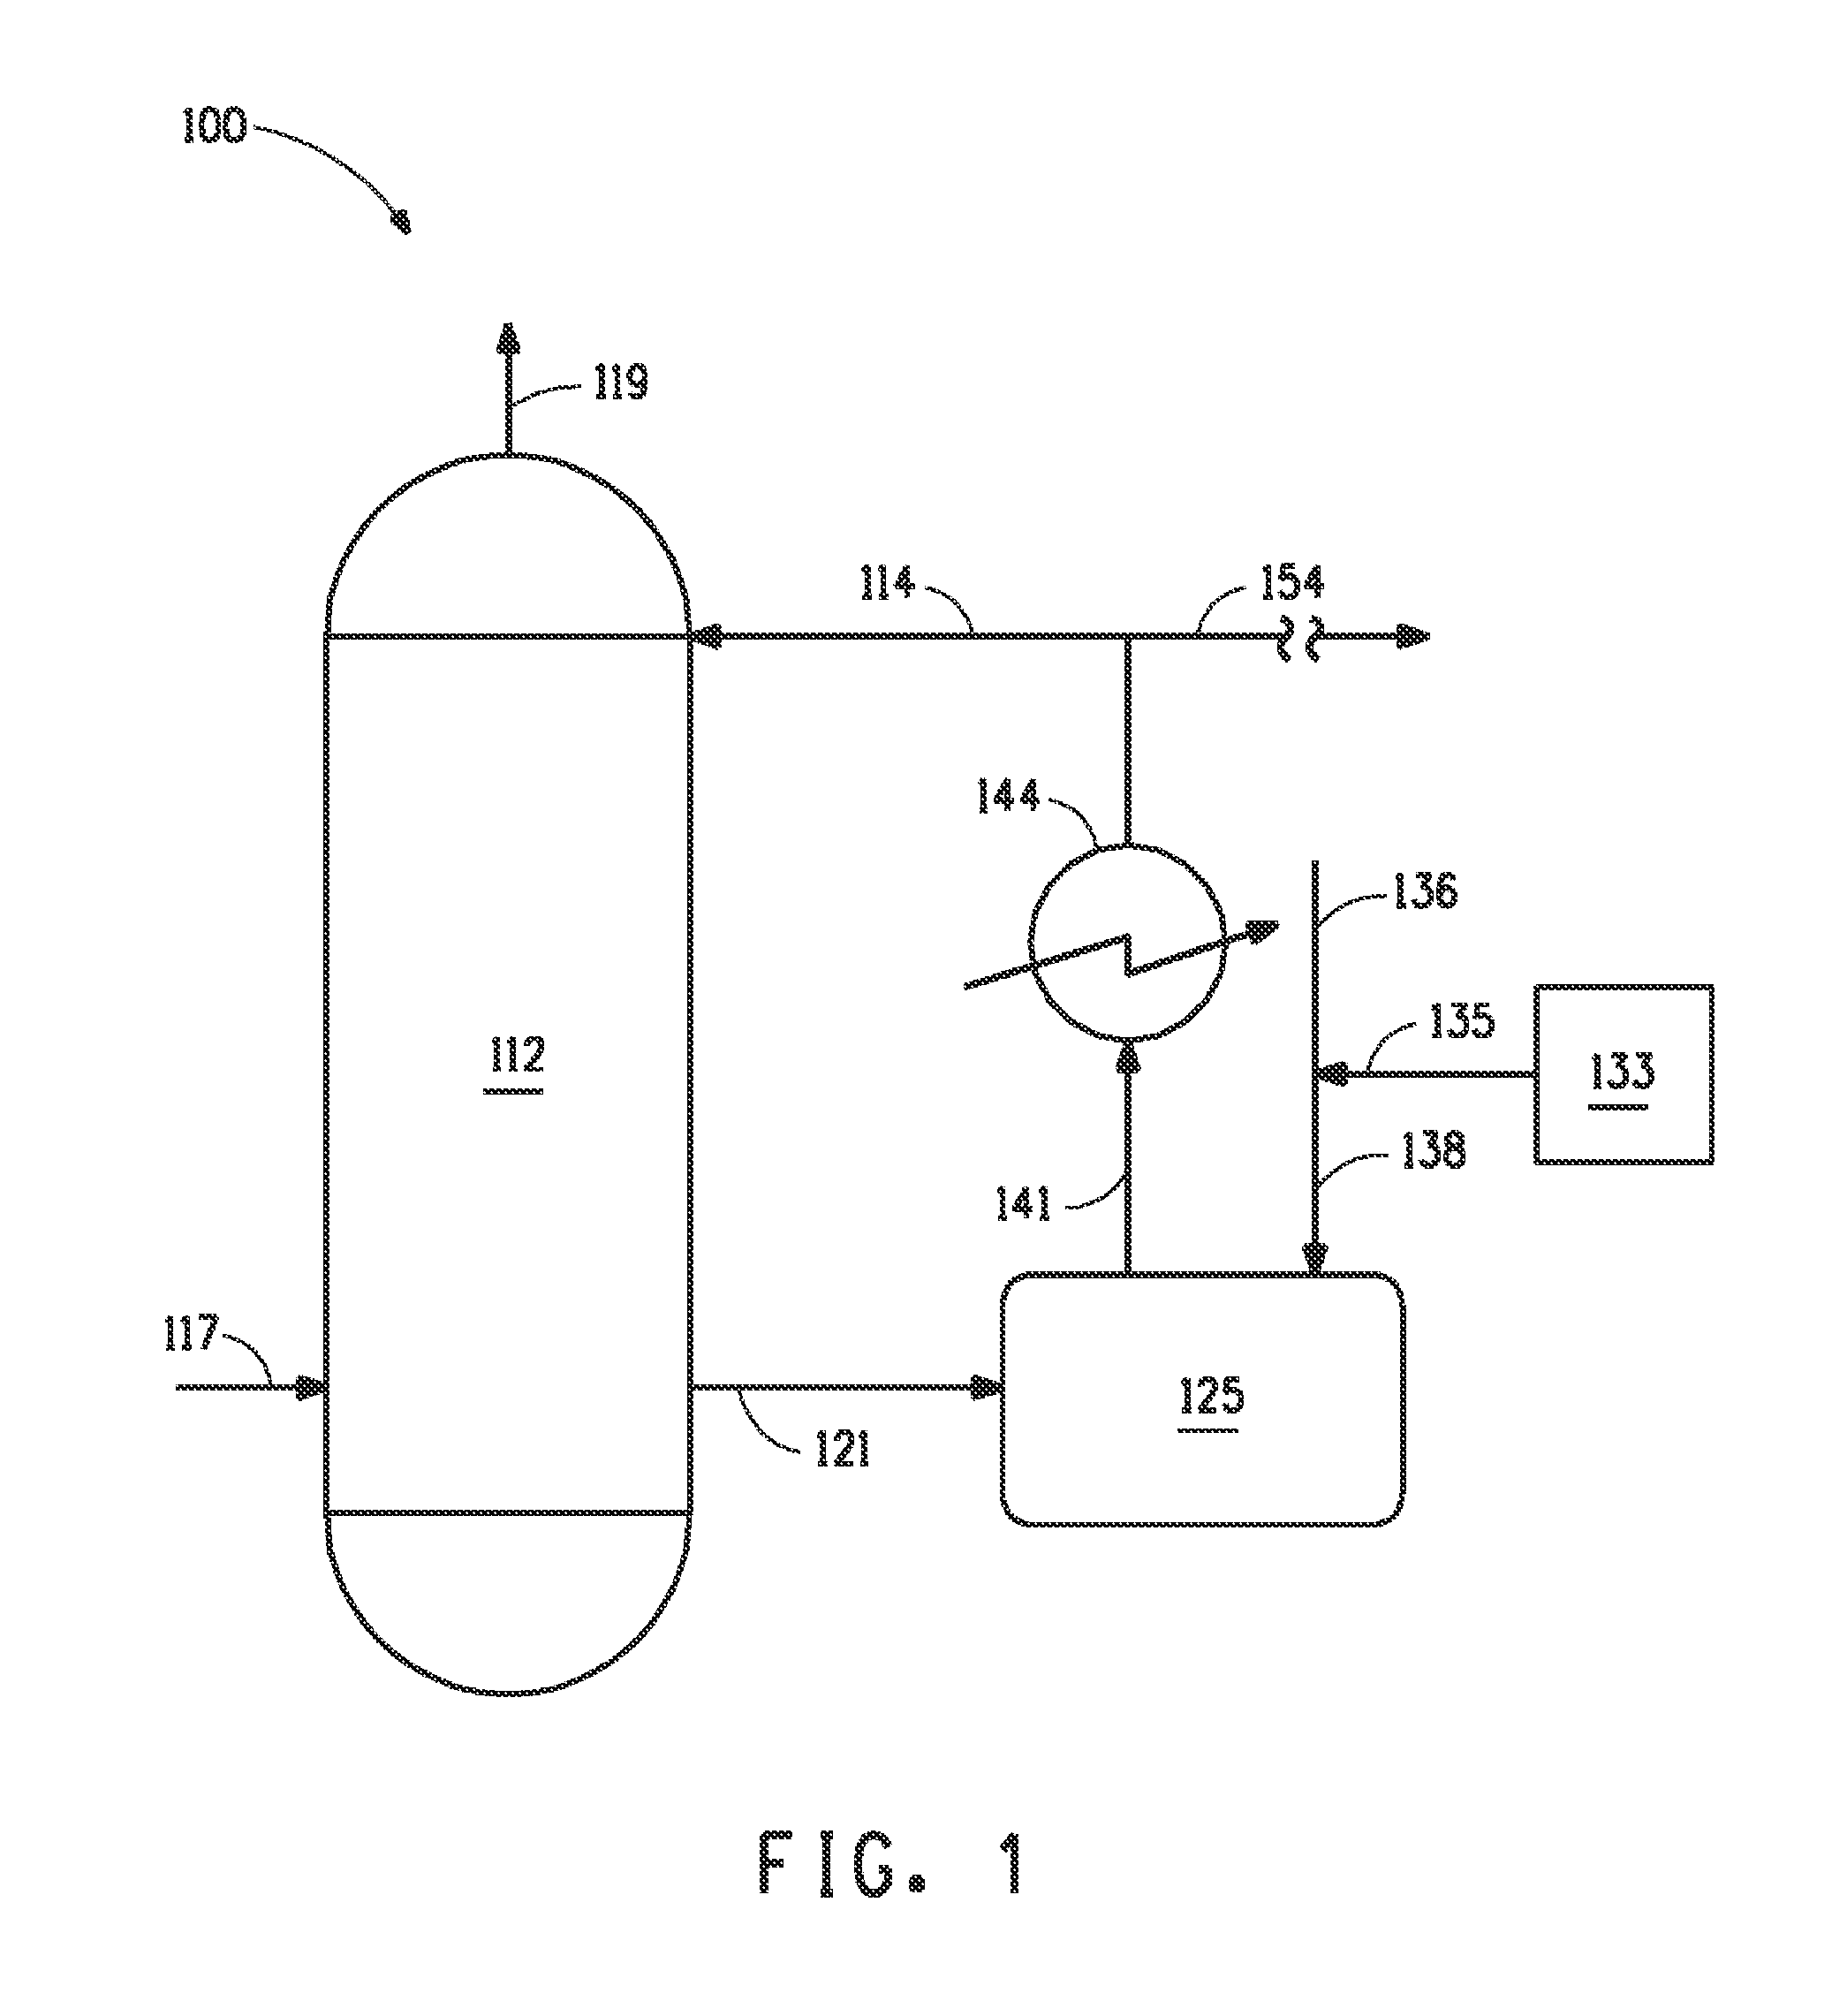 Process for producing sulfuric acid with low levels of nitrogen oxides